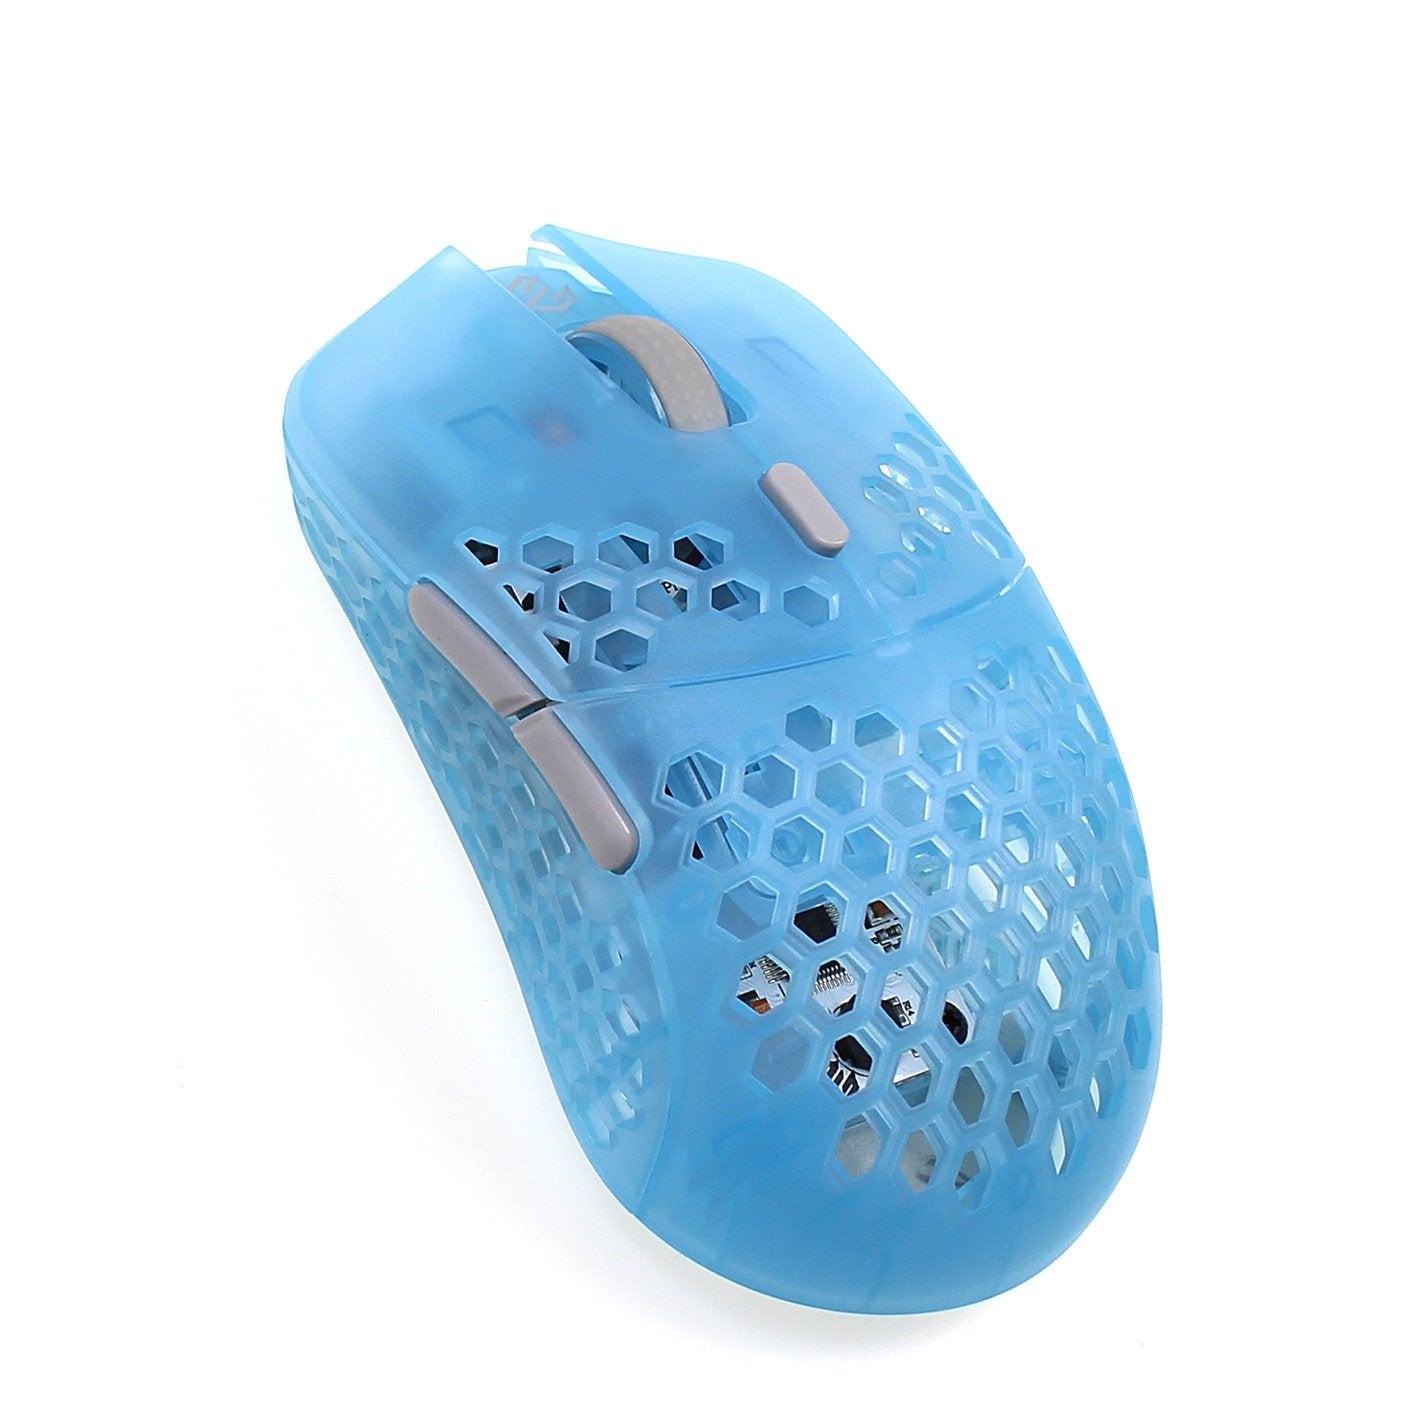 G-wolves Hati Small HTS Transparent Blue Wired Gaming Mouse-Addice Inc